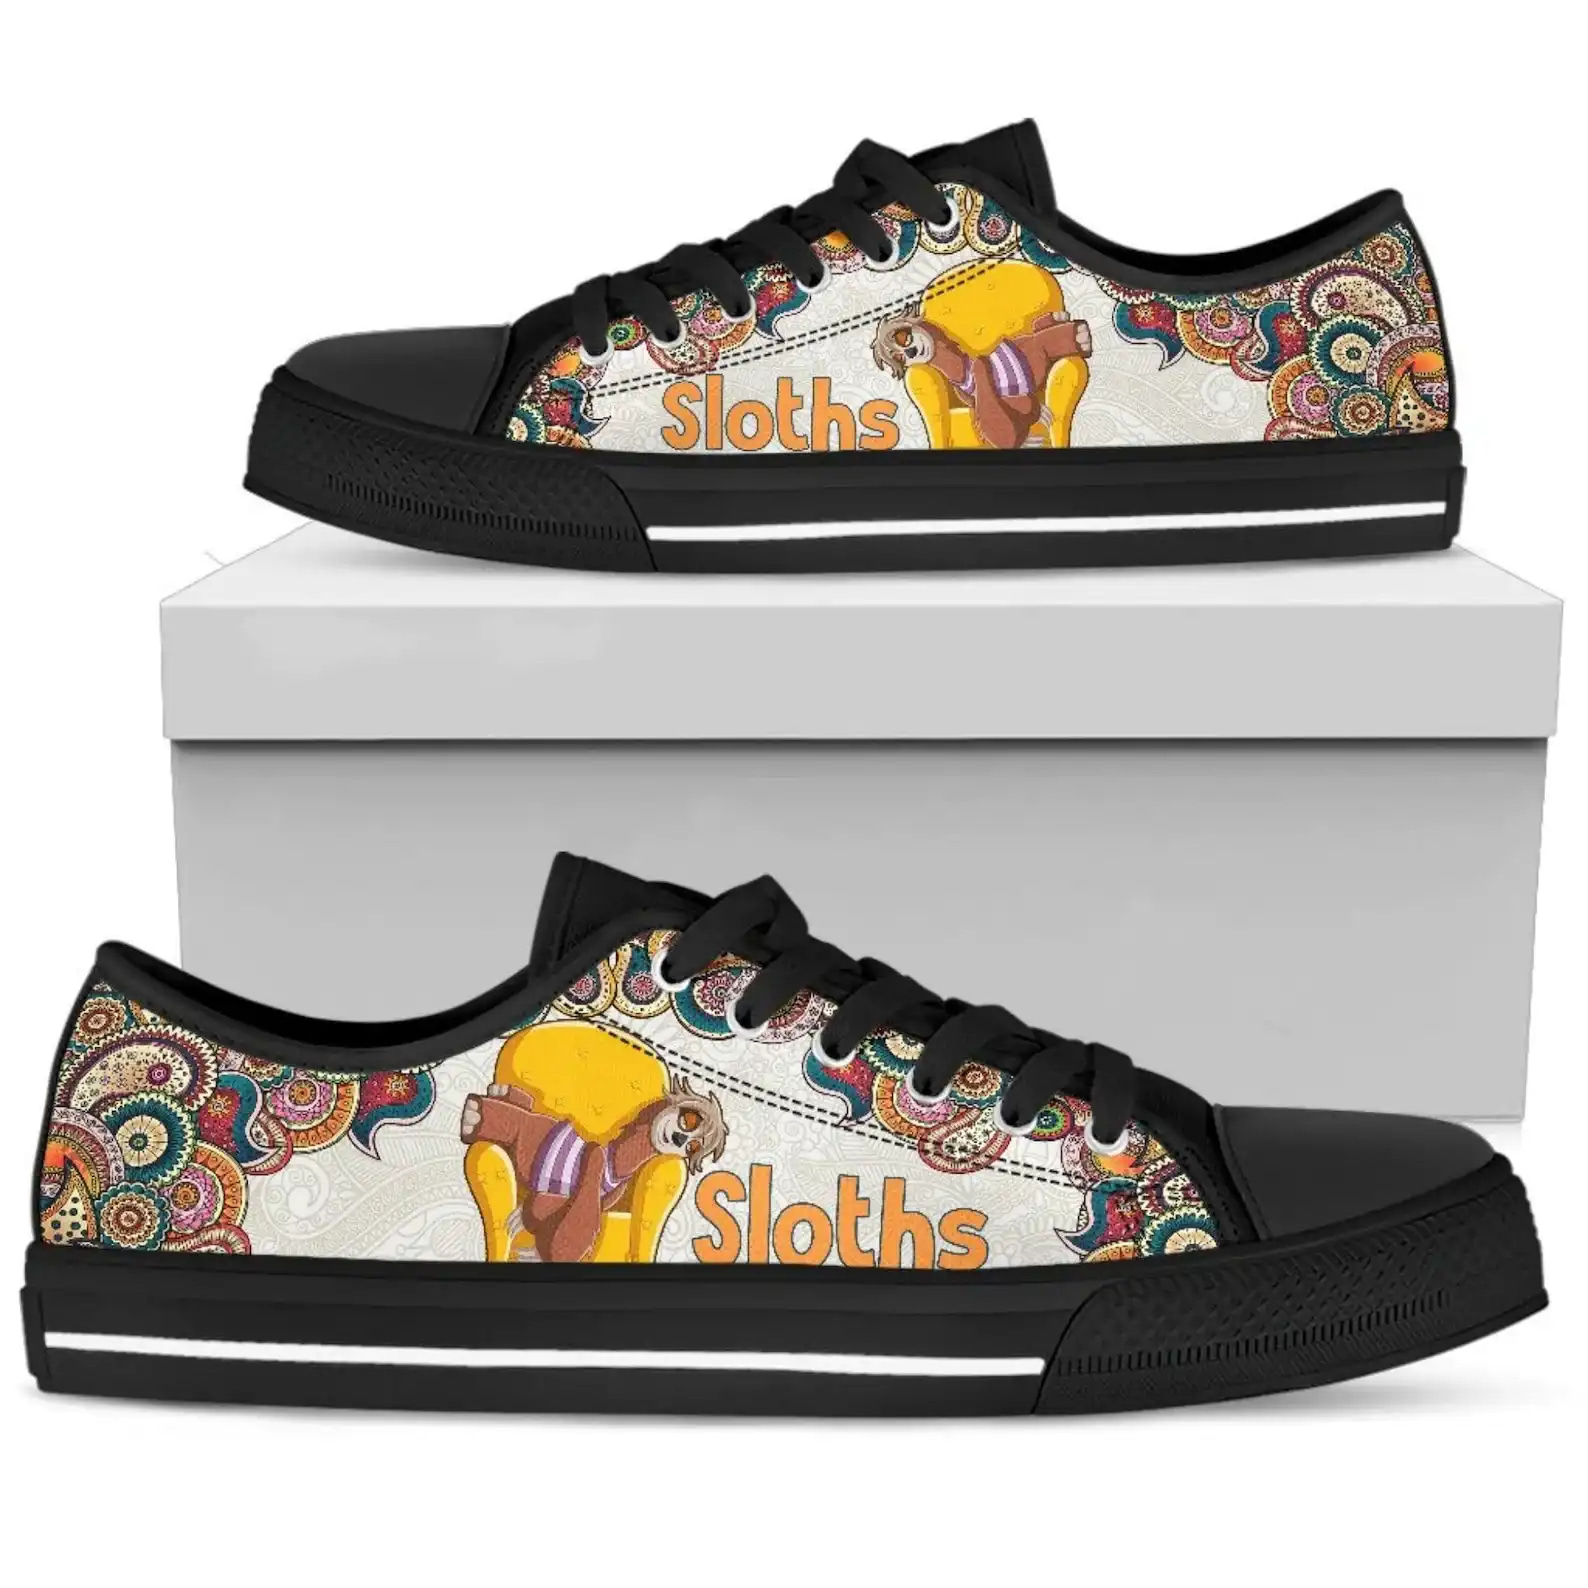 Customized Sloth Low Top Sneakers